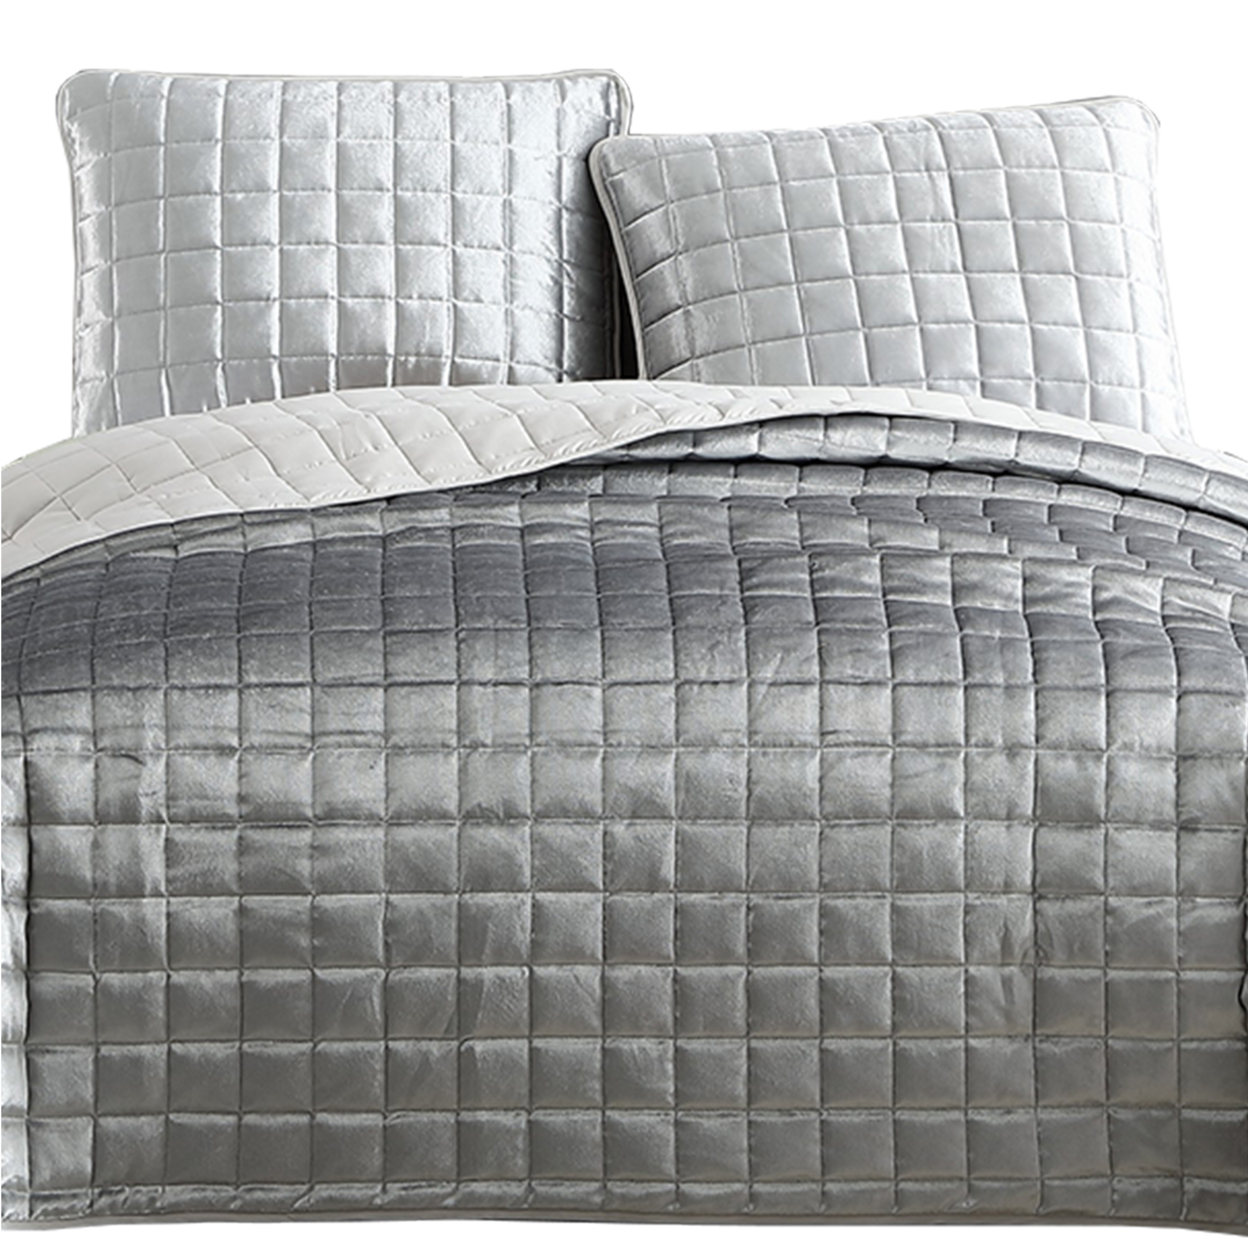 3 Piece King Size Coverlet Set With Stitched Square Pattern, Silver- Saltoro Sherpi